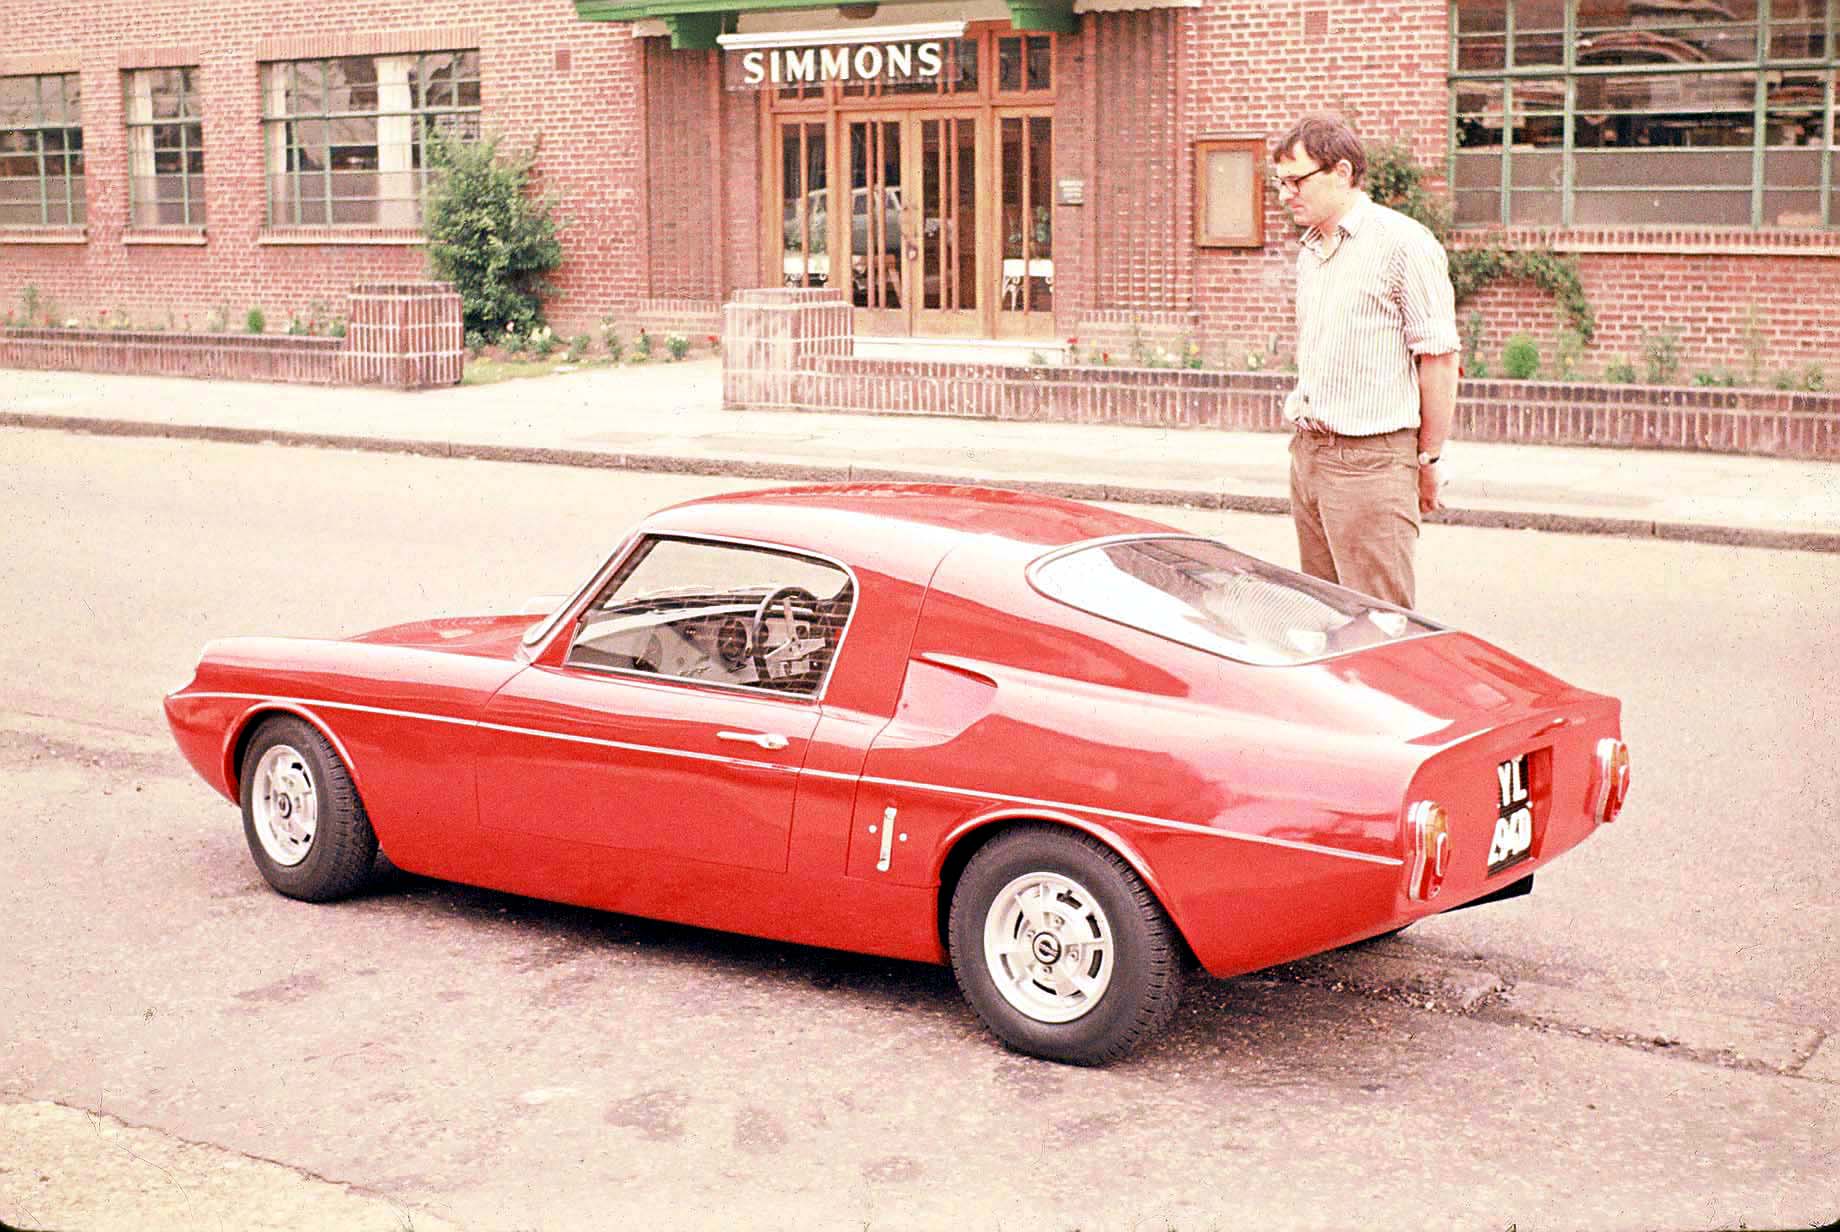 More than just a Pocket Rocket - The 1966 Unipower GT